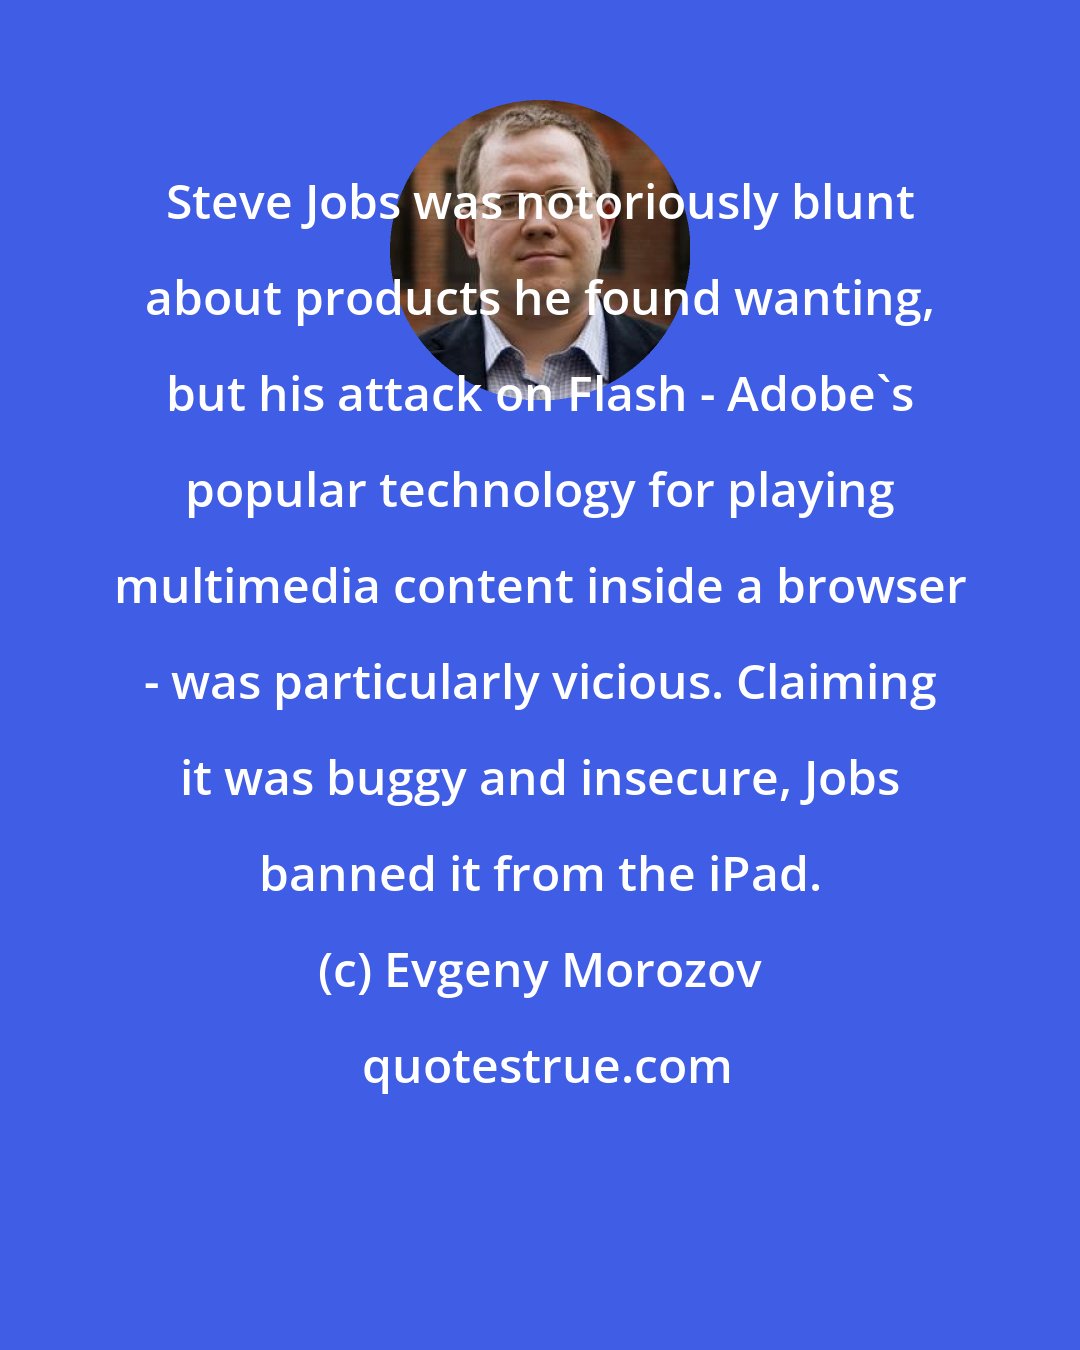 Evgeny Morozov: Steve Jobs was notoriously blunt about products he found wanting, but his attack on Flash - Adobe's popular technology for playing multimedia content inside a browser - was particularly vicious. Claiming it was buggy and insecure, Jobs banned it from the iPad.